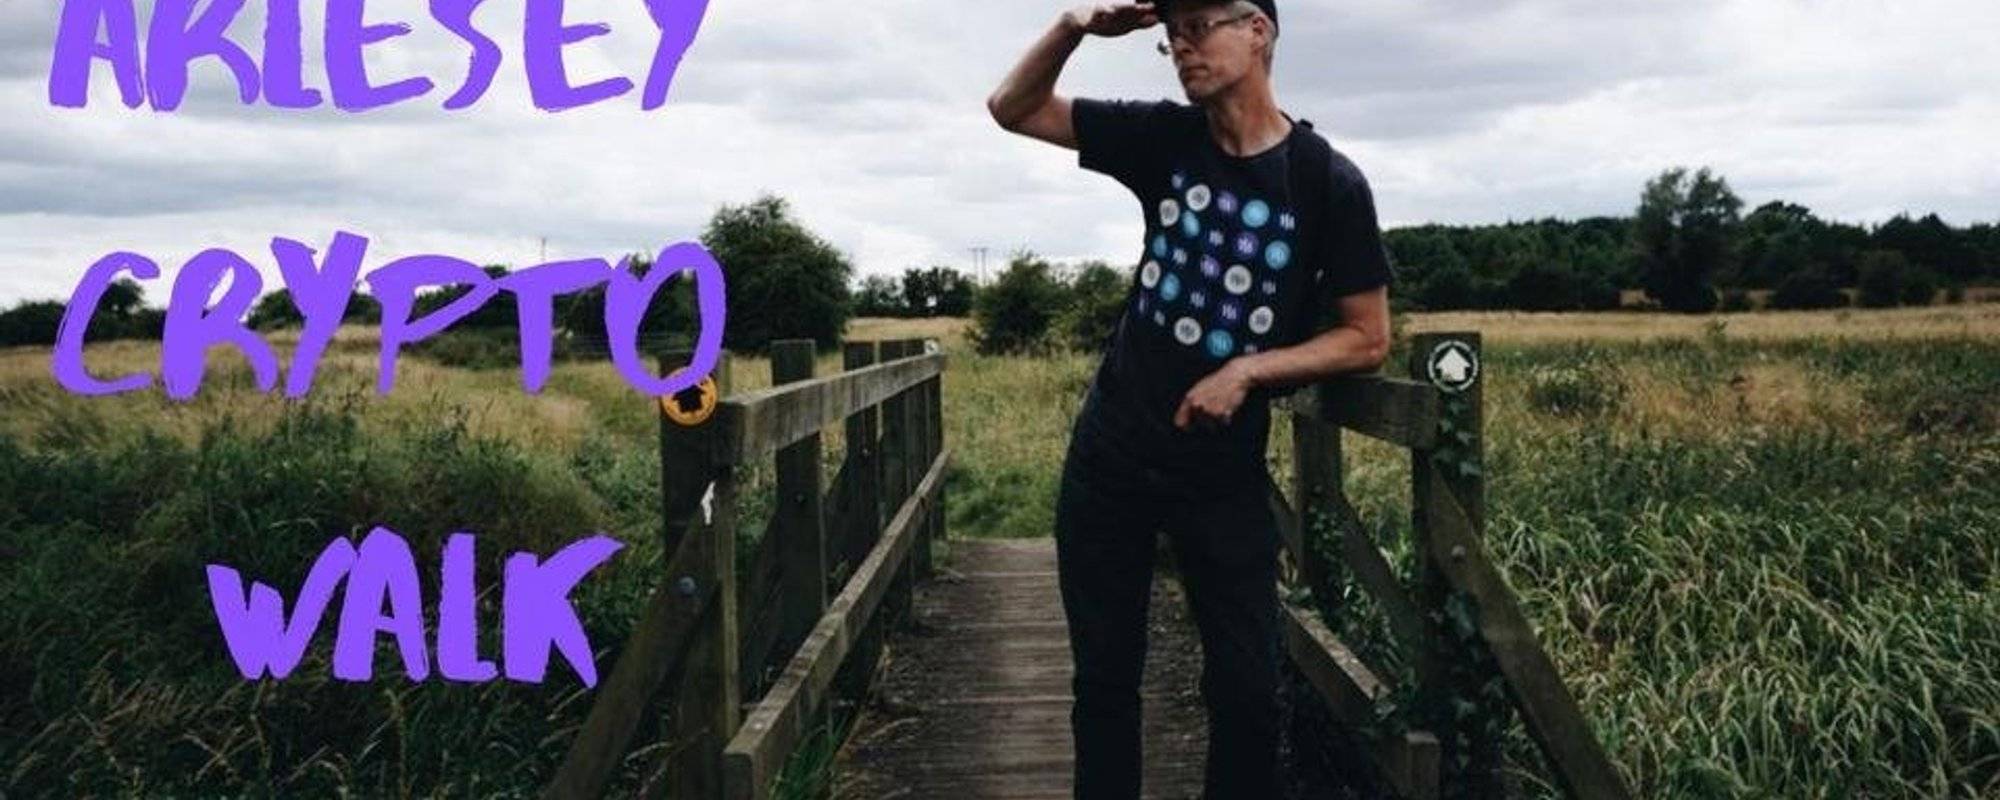 The first Arlesey Crypto Walk